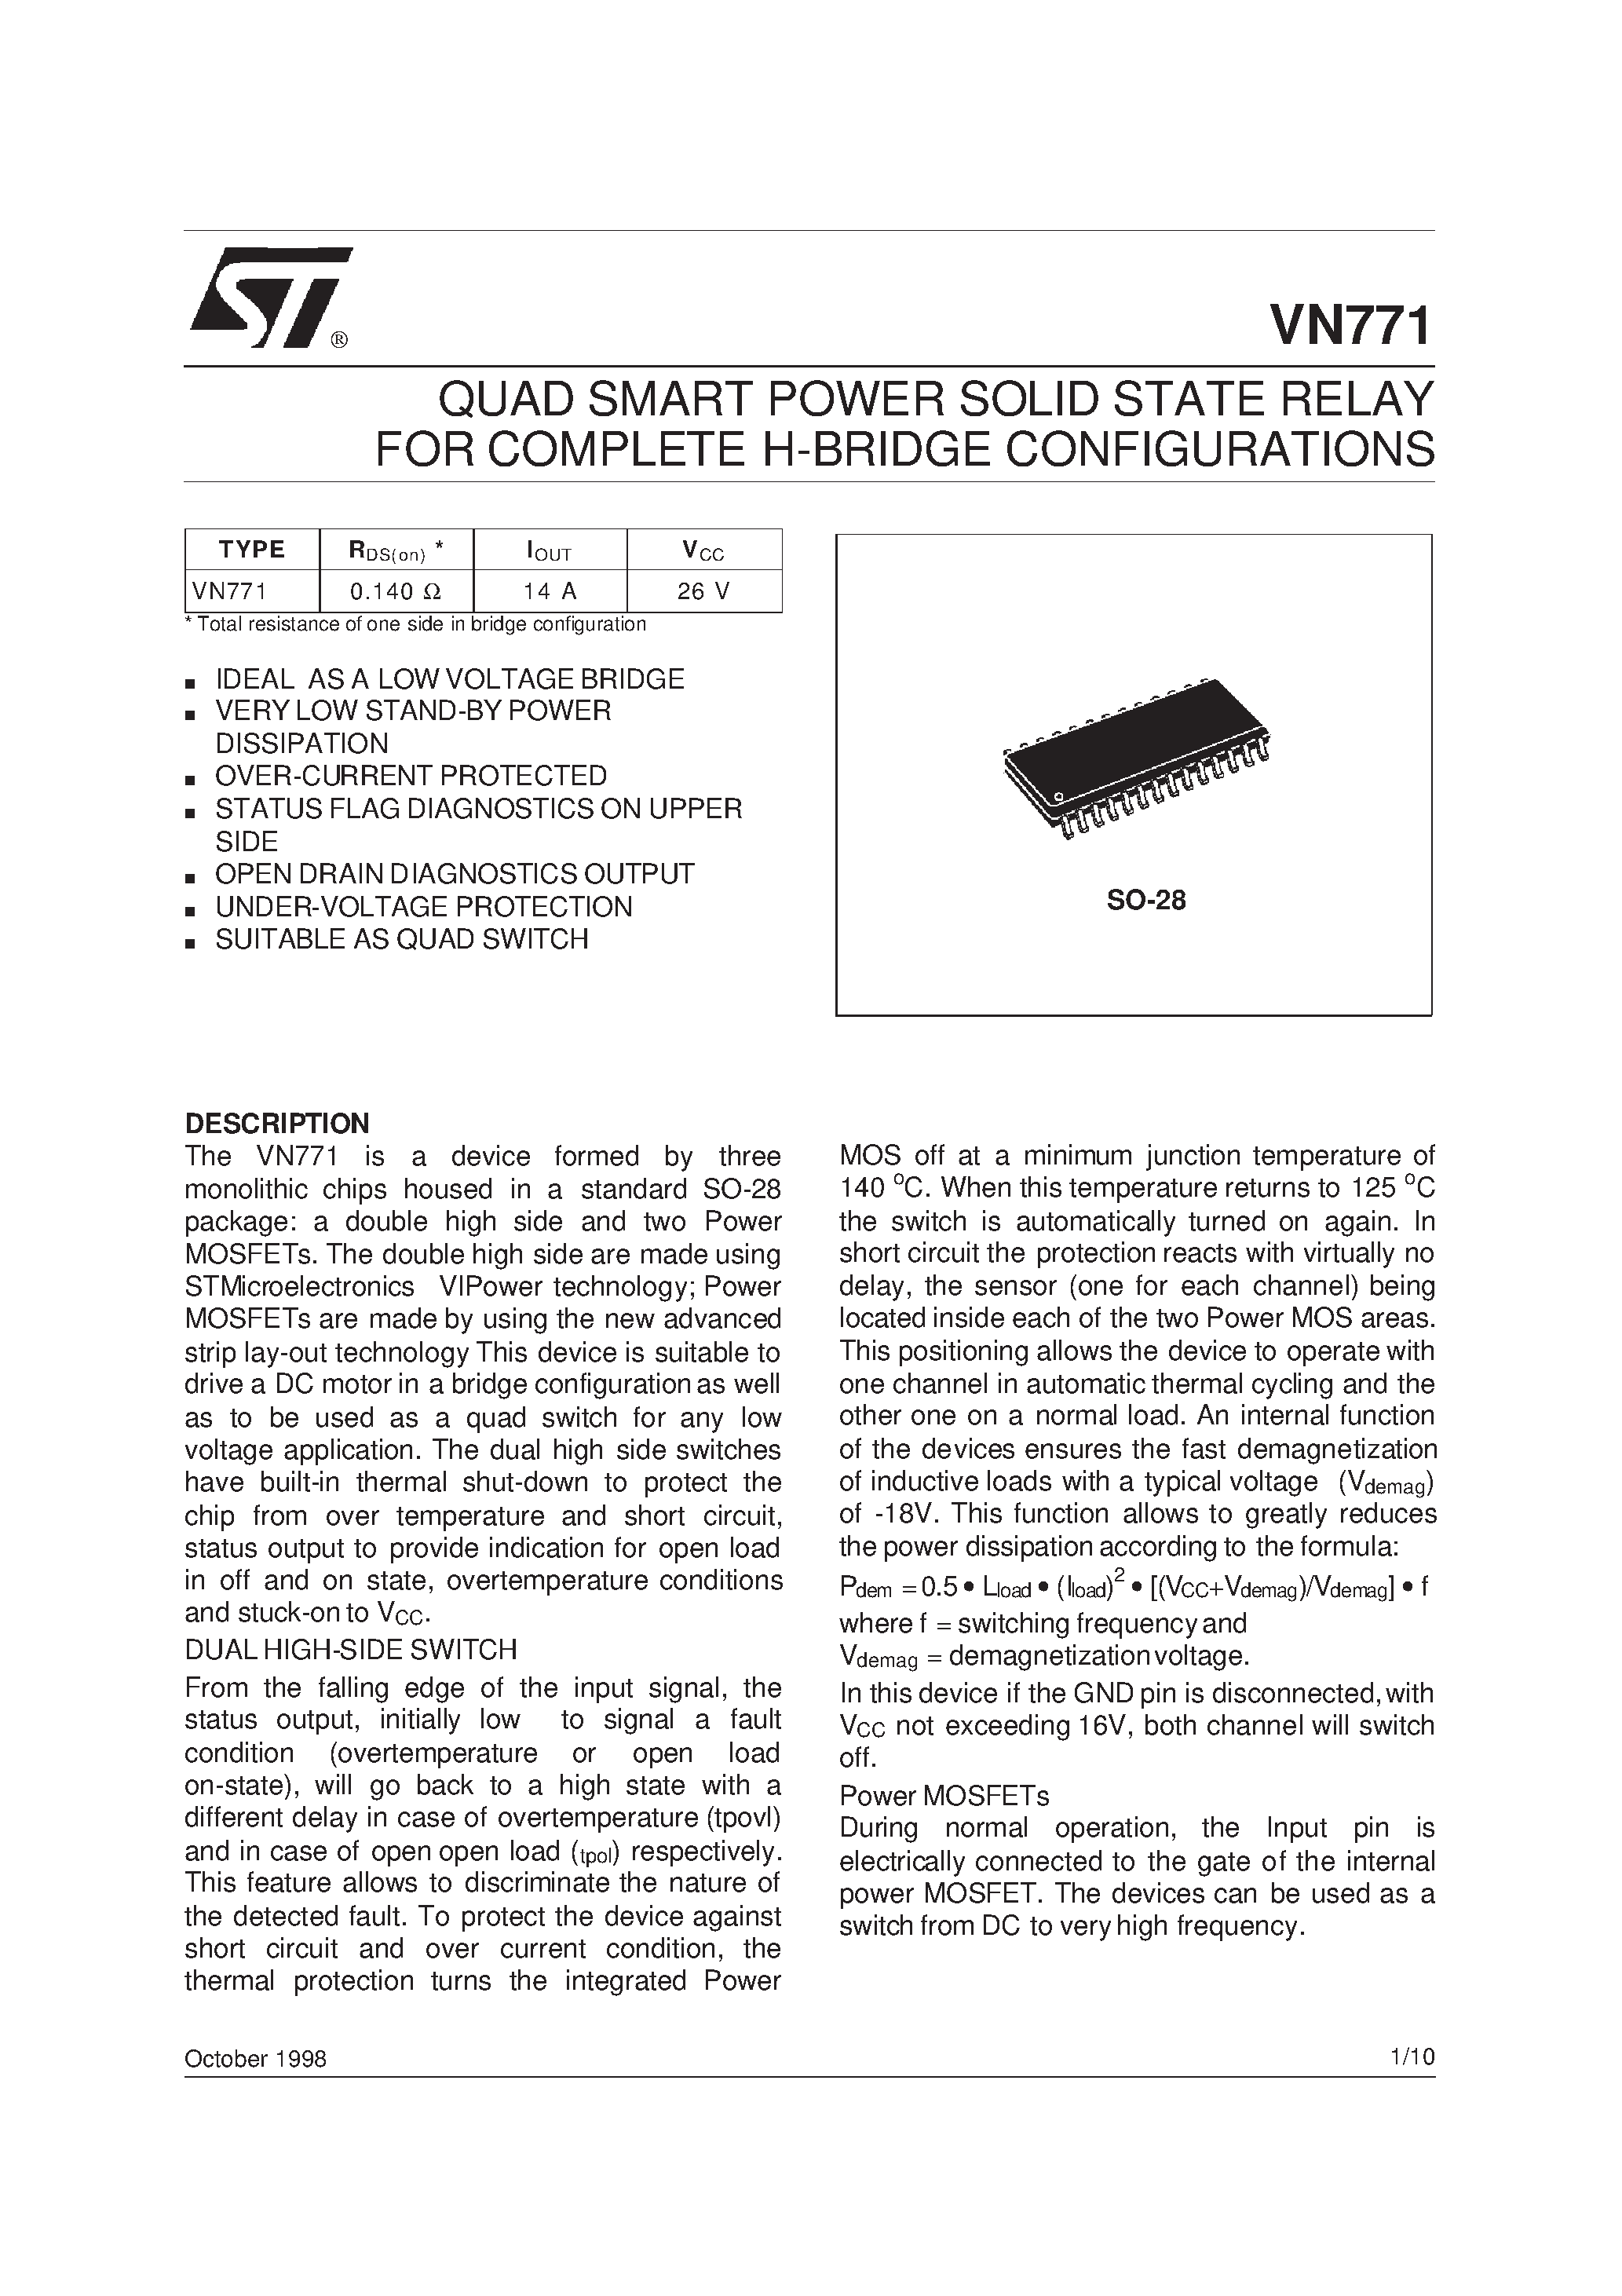 Datasheet VN771 - QUAD SMART POWER SOLID STATE RELAY FOR COMPLETE H-BRIDGE CONFIGURATIONS page 1